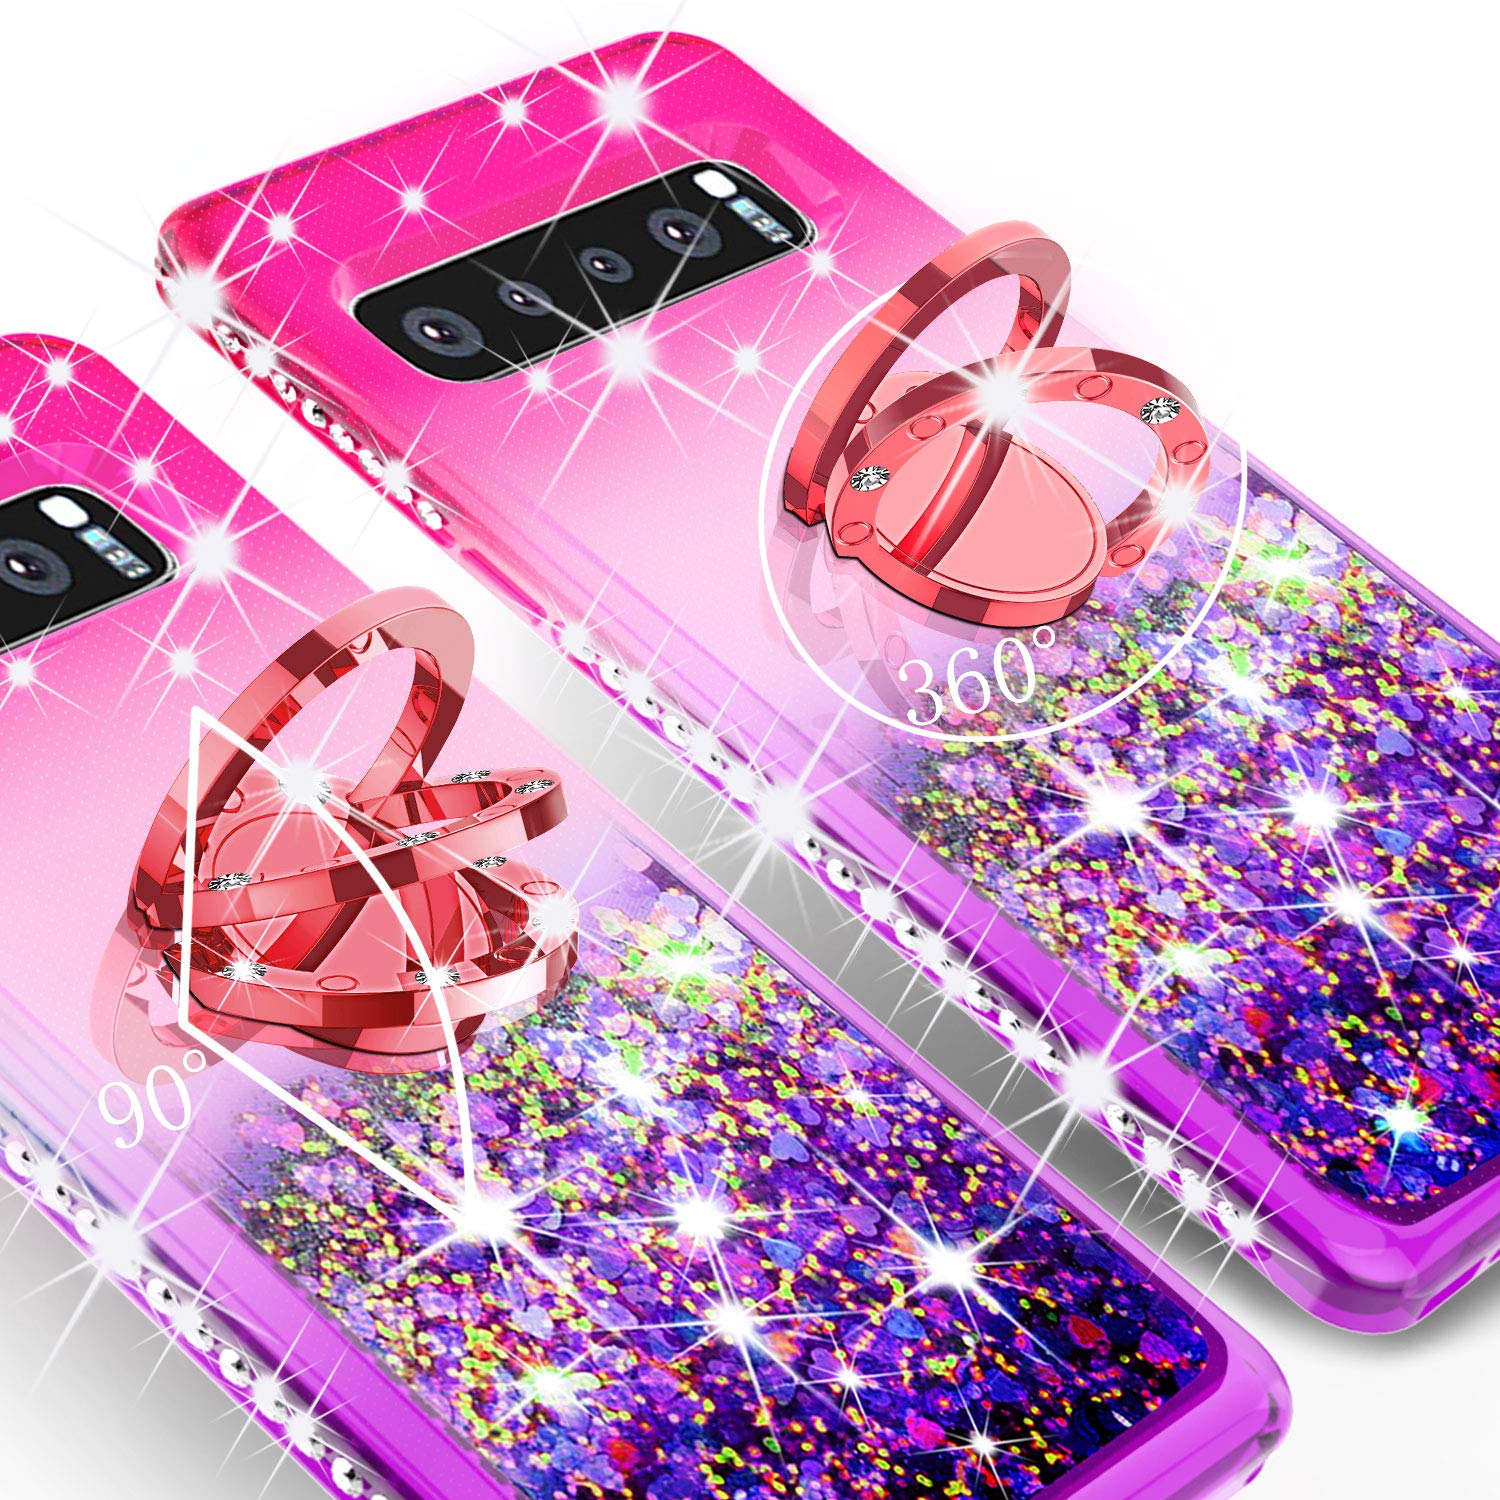 For Samsung Galaxy S10 Case,Ring Stand Glitter Liquid Quicksand Waterfall Floating Sparkle Shiny Bling Diamond Girls Cute Shock Proof Phone Case Cover for Galaxy S10 - Hot Pink/Blue - image 3 of 5